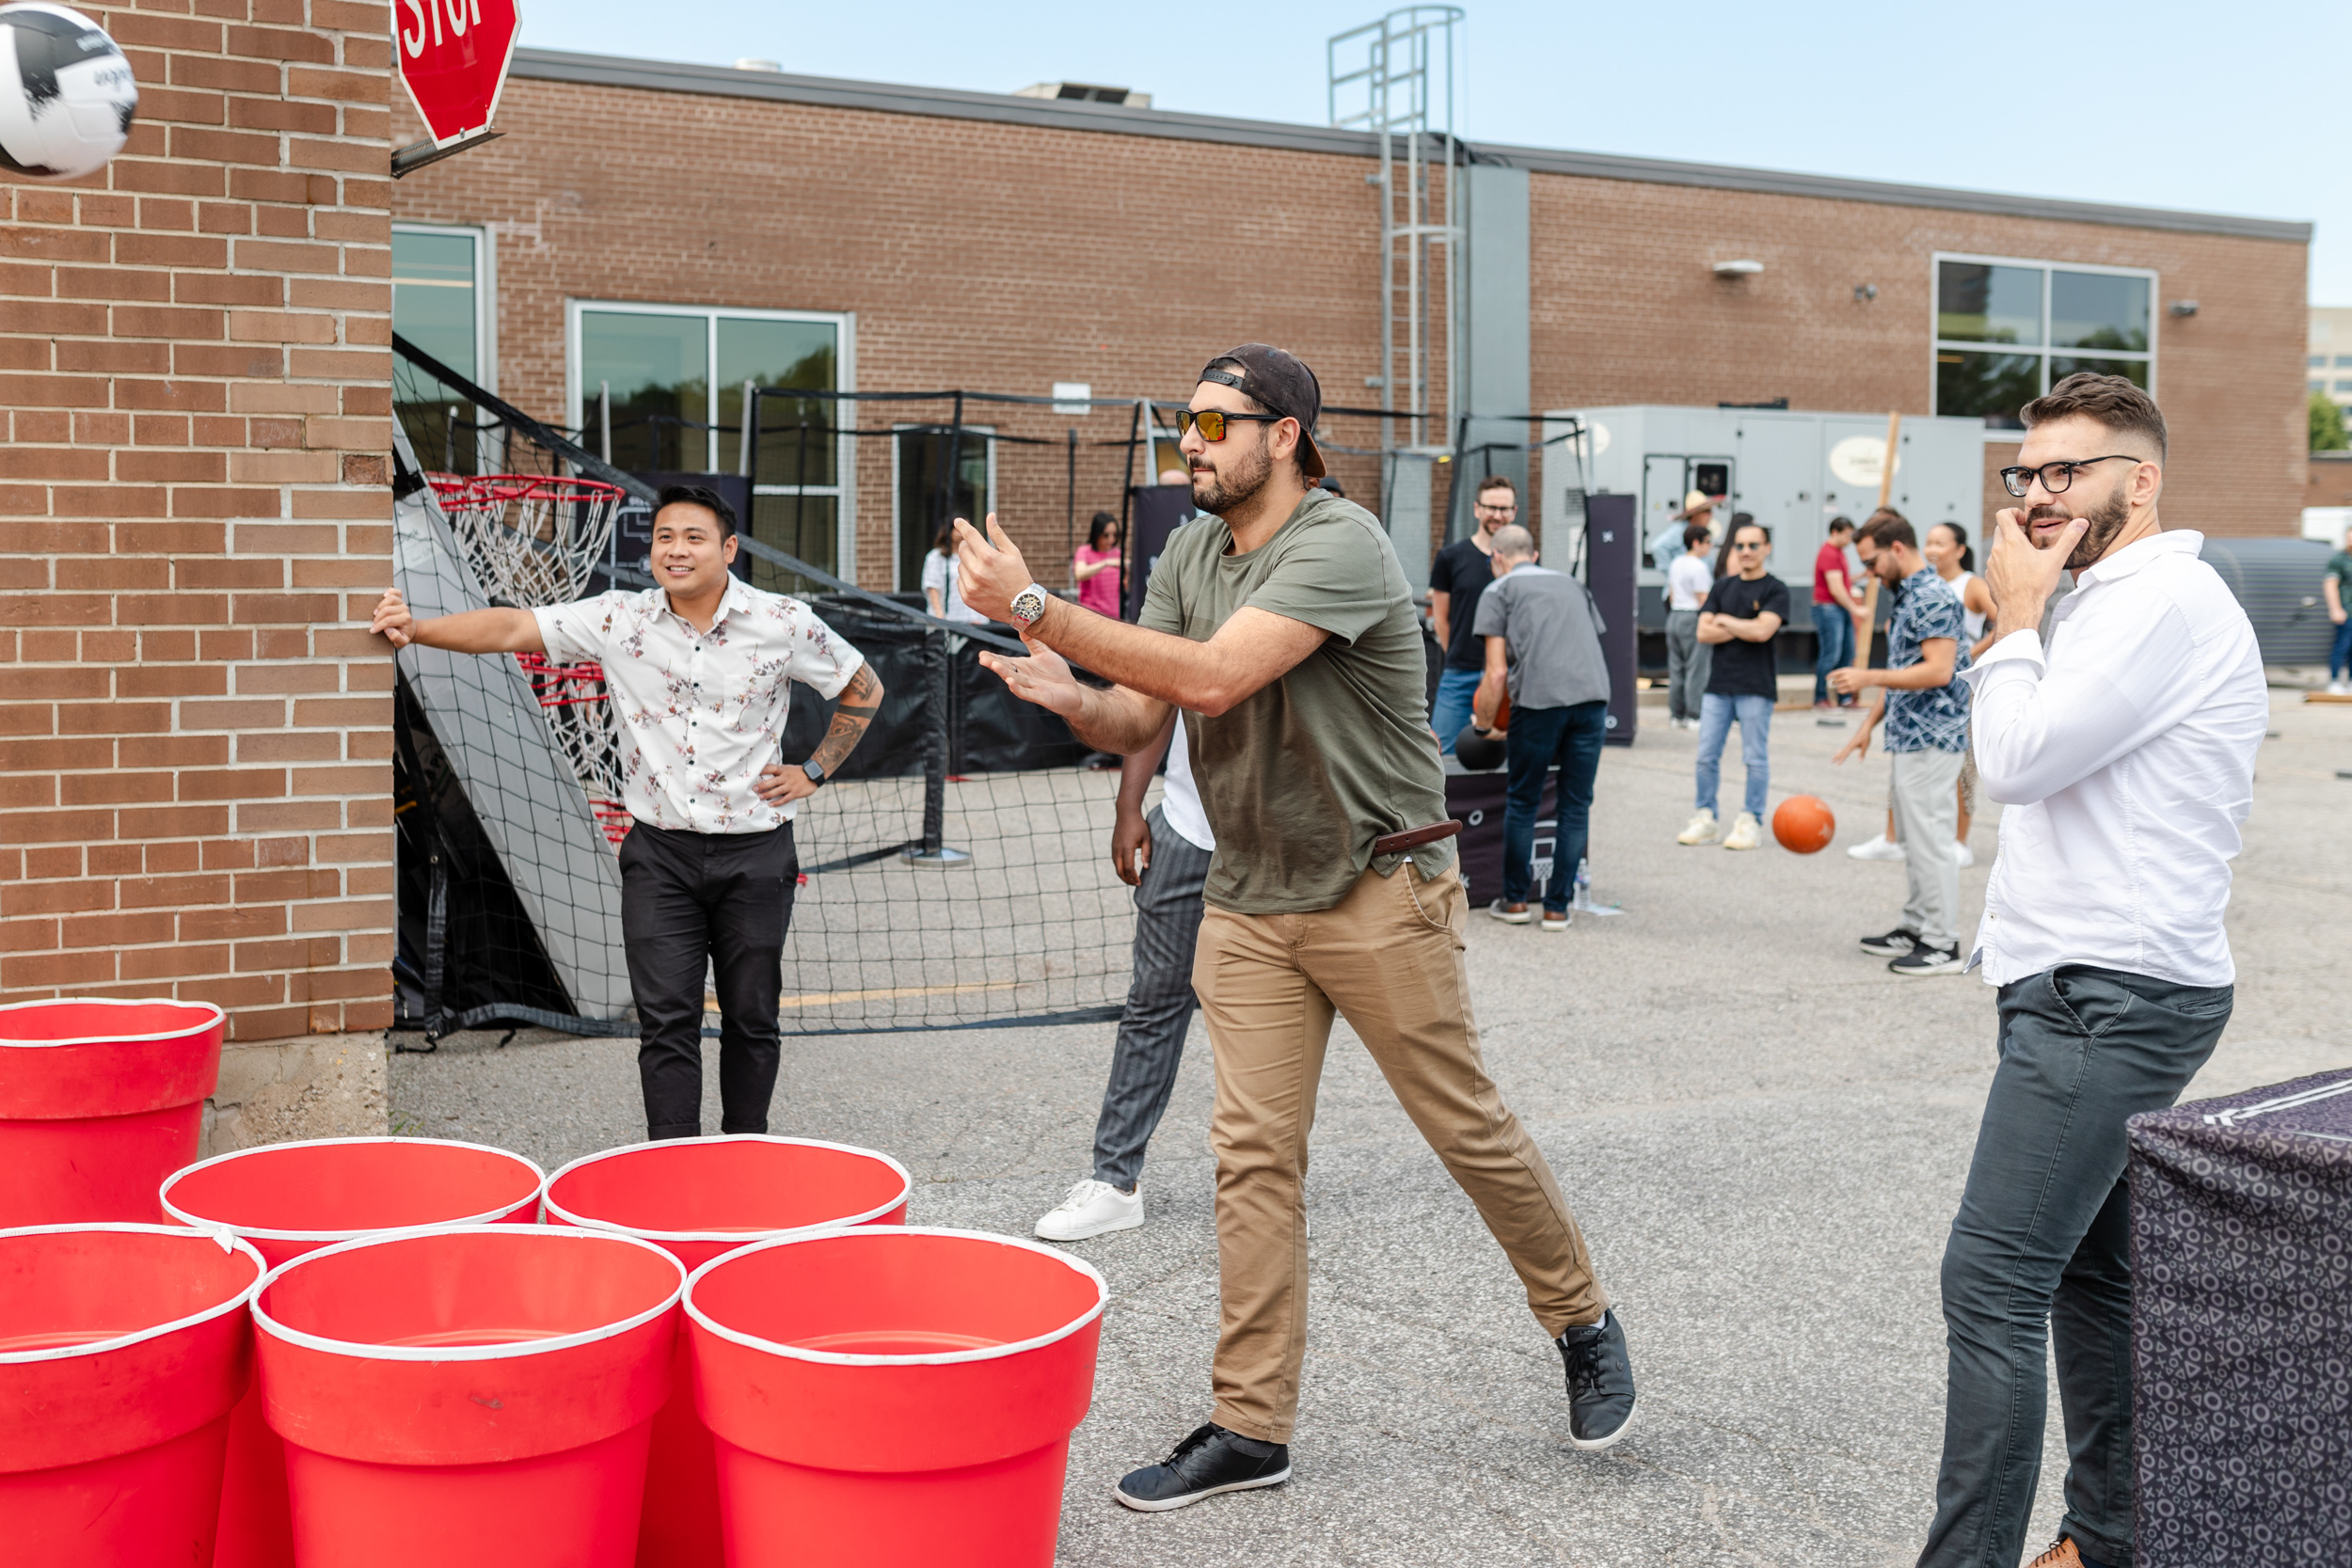 A group of people playing a game of beer pong.